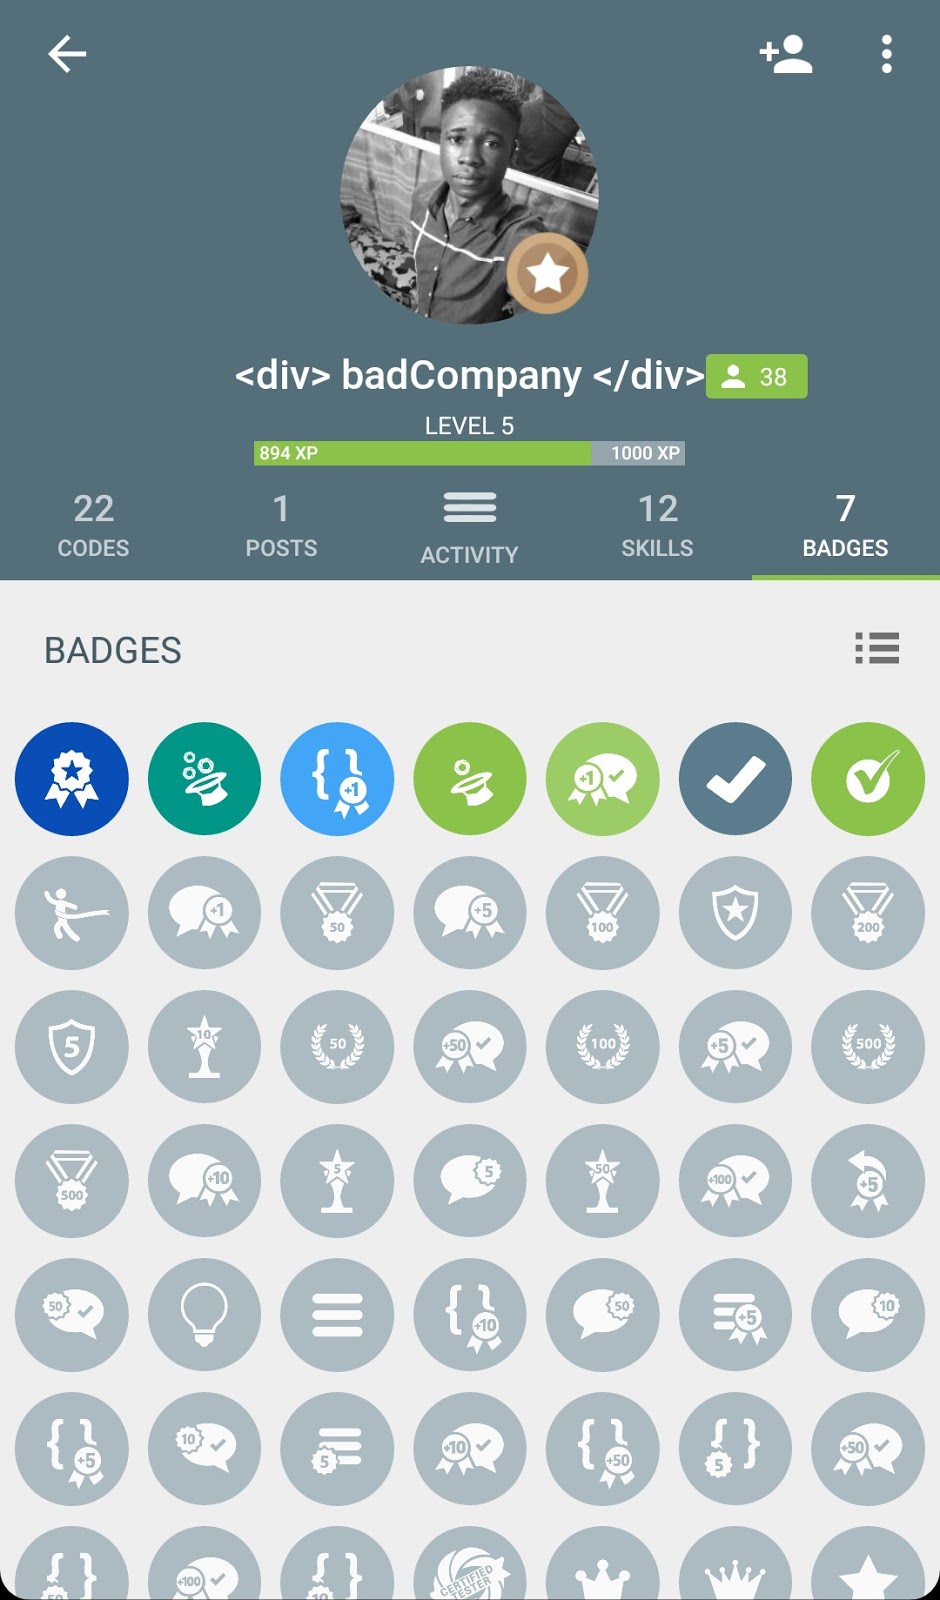 SoloLearn badges